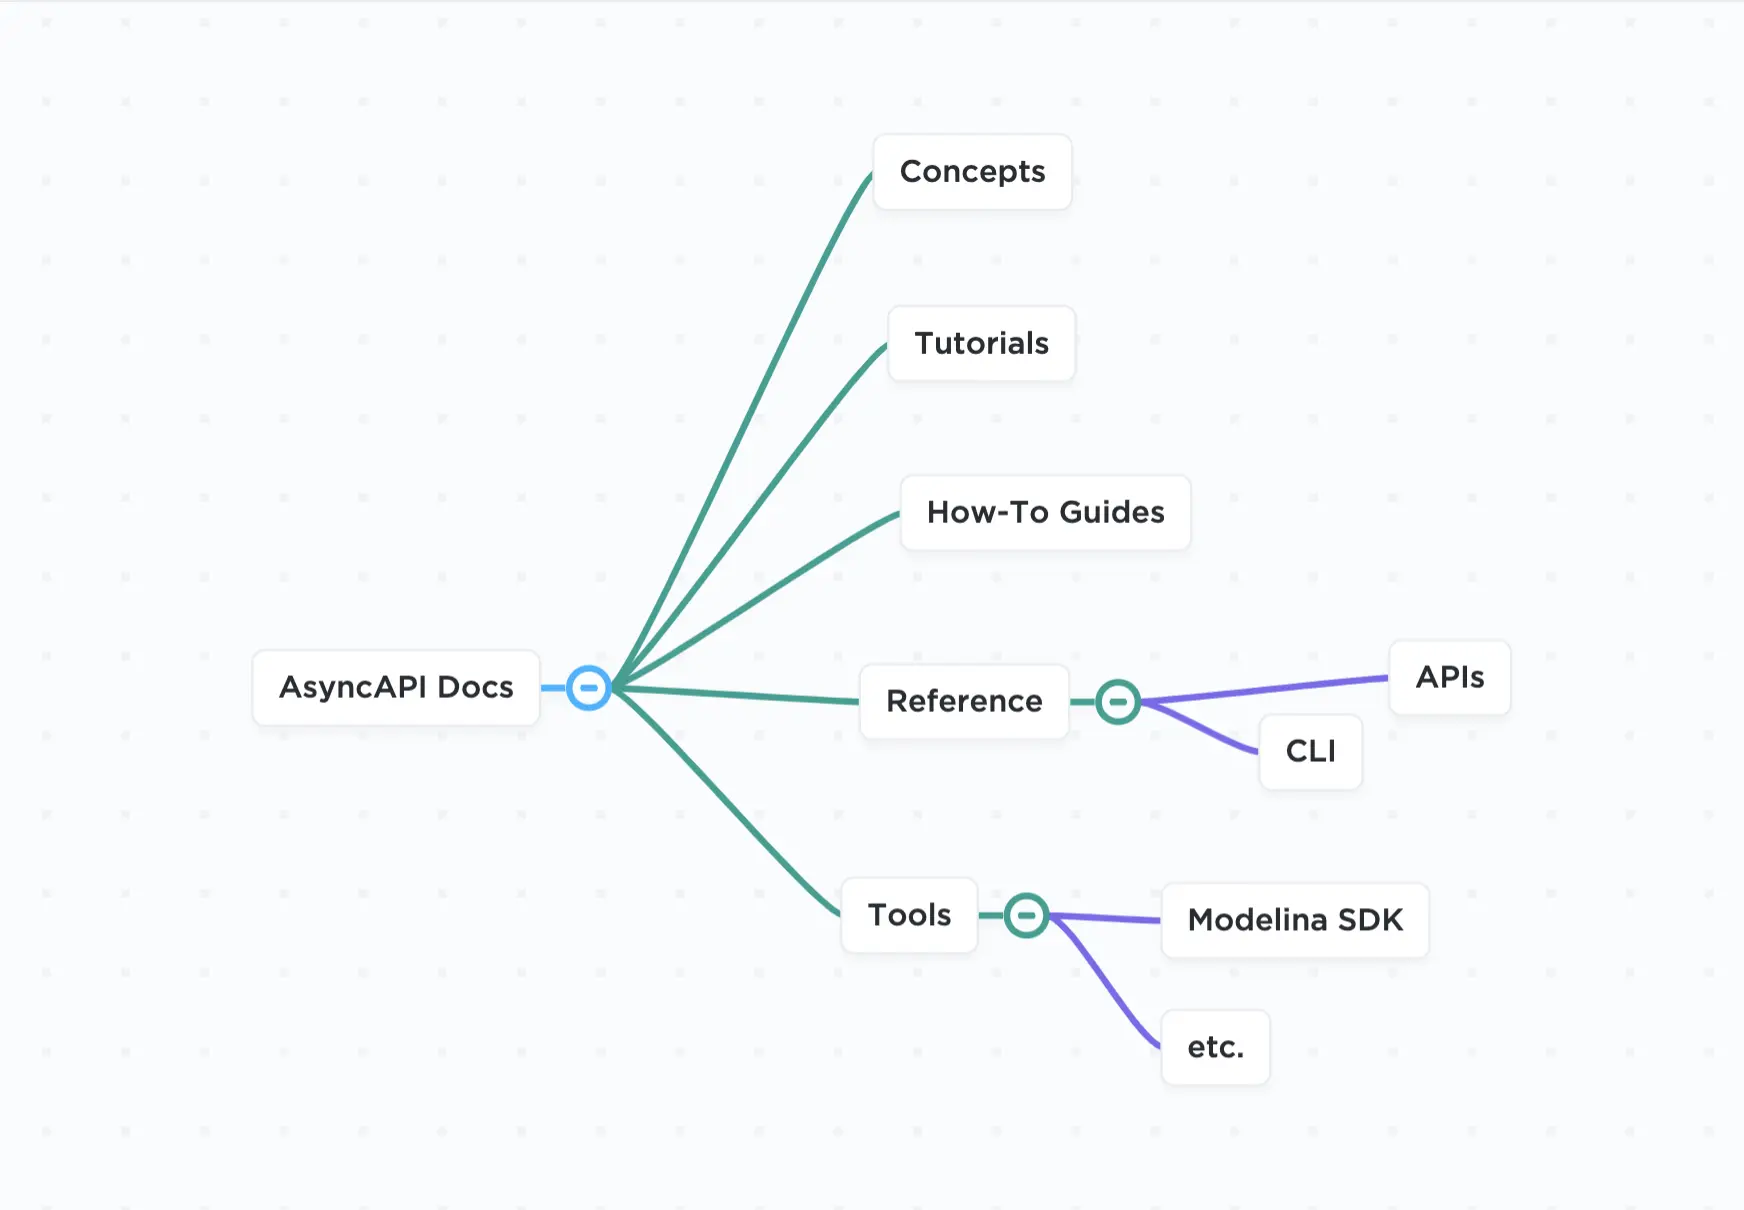 Mind Map, displaying Diátaxis system applied to documenting AsyncAPI capabilities